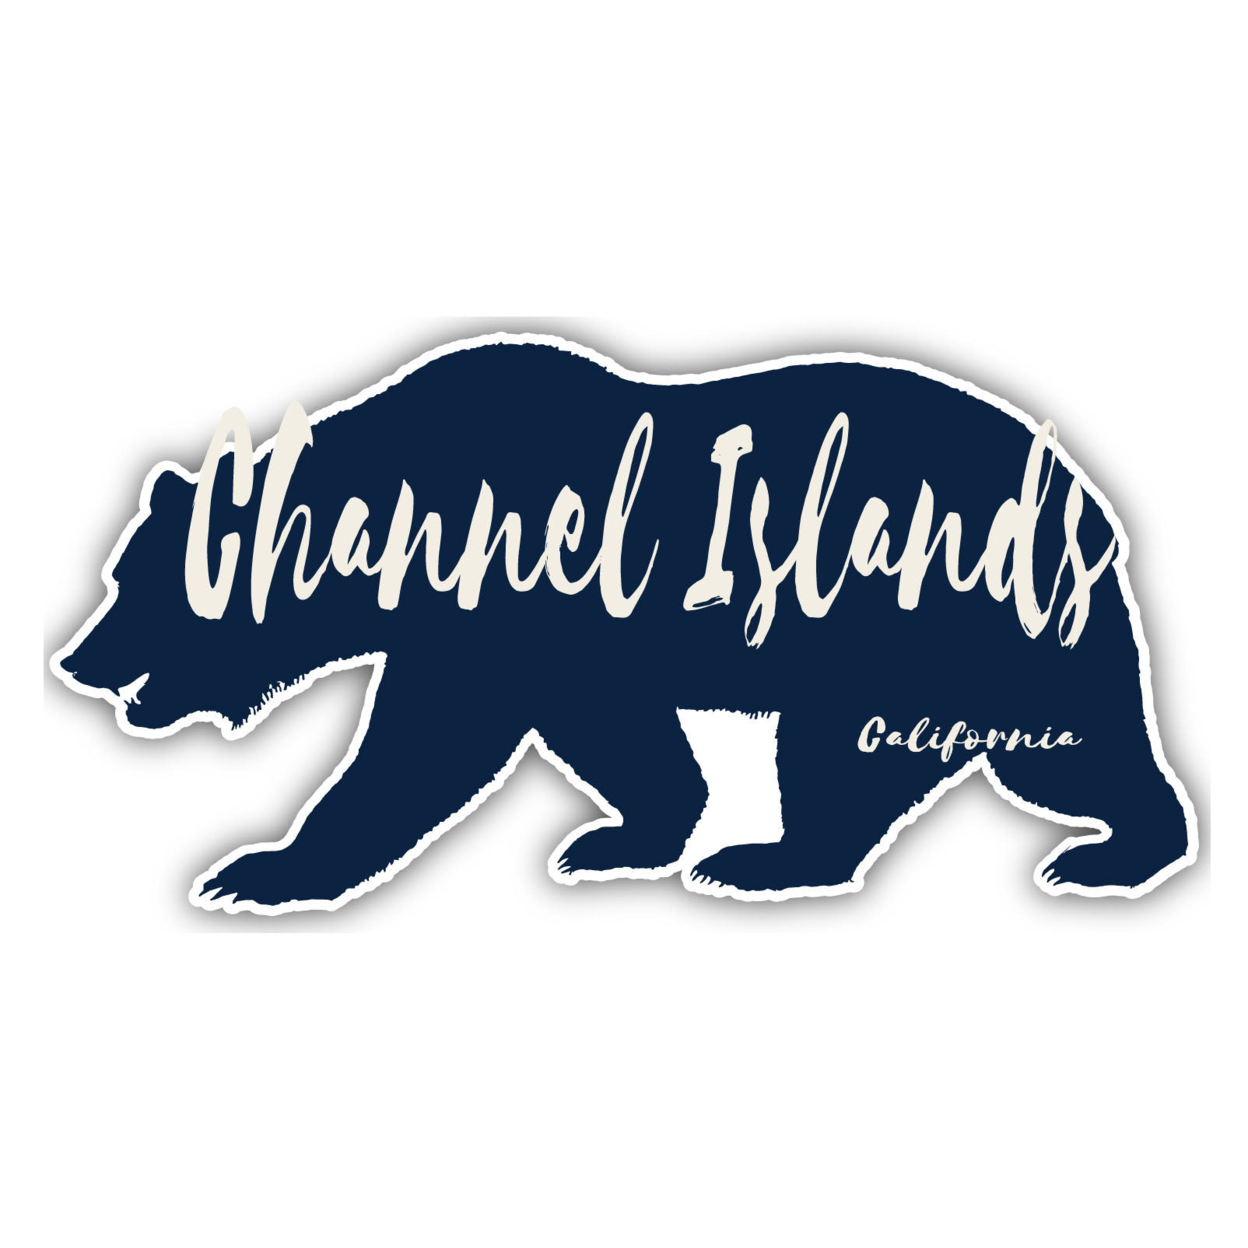 Channel Islands California Souvenir Decorative Stickers (Choose Theme And Size) - 4-Pack, 8-Inch, Bear